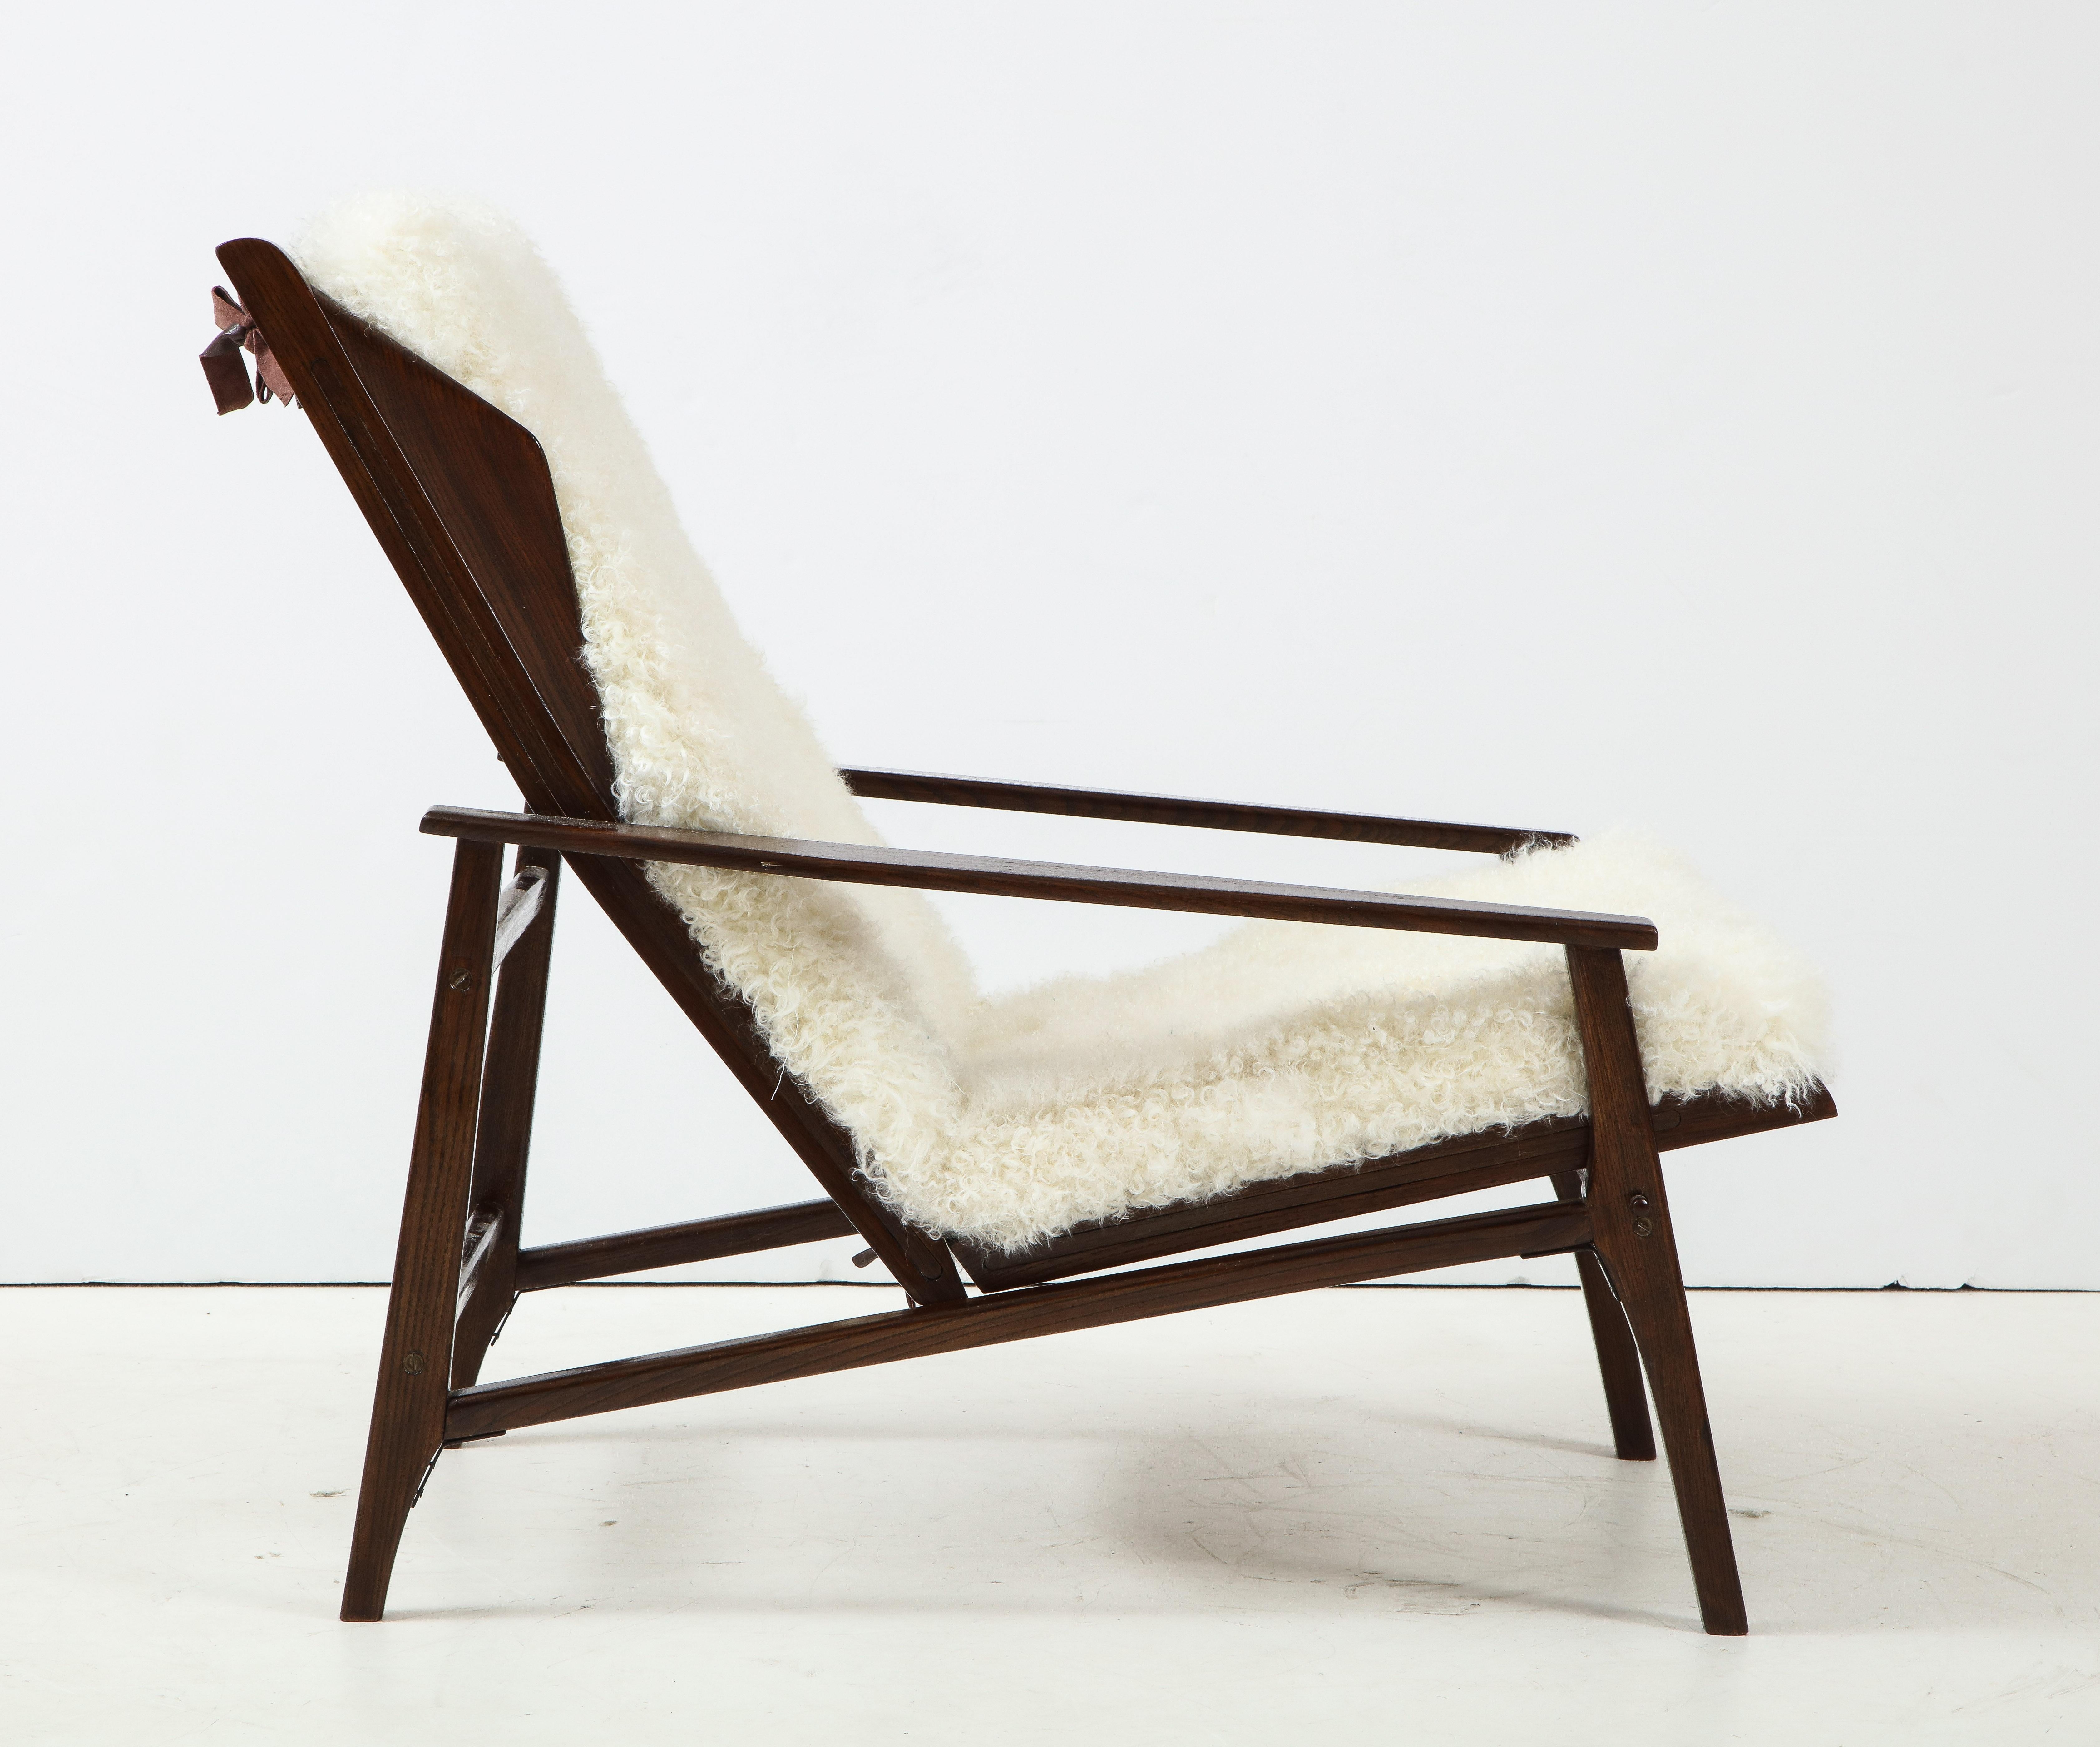 1950s chic Italian reclining lounge chair with stained oak frame and back and seat cushions upholstered in a luxurious white Kalgan lambskin.  This lounge chair can be adjusted to different reclining positions. The Kalgan lambskin cushions have